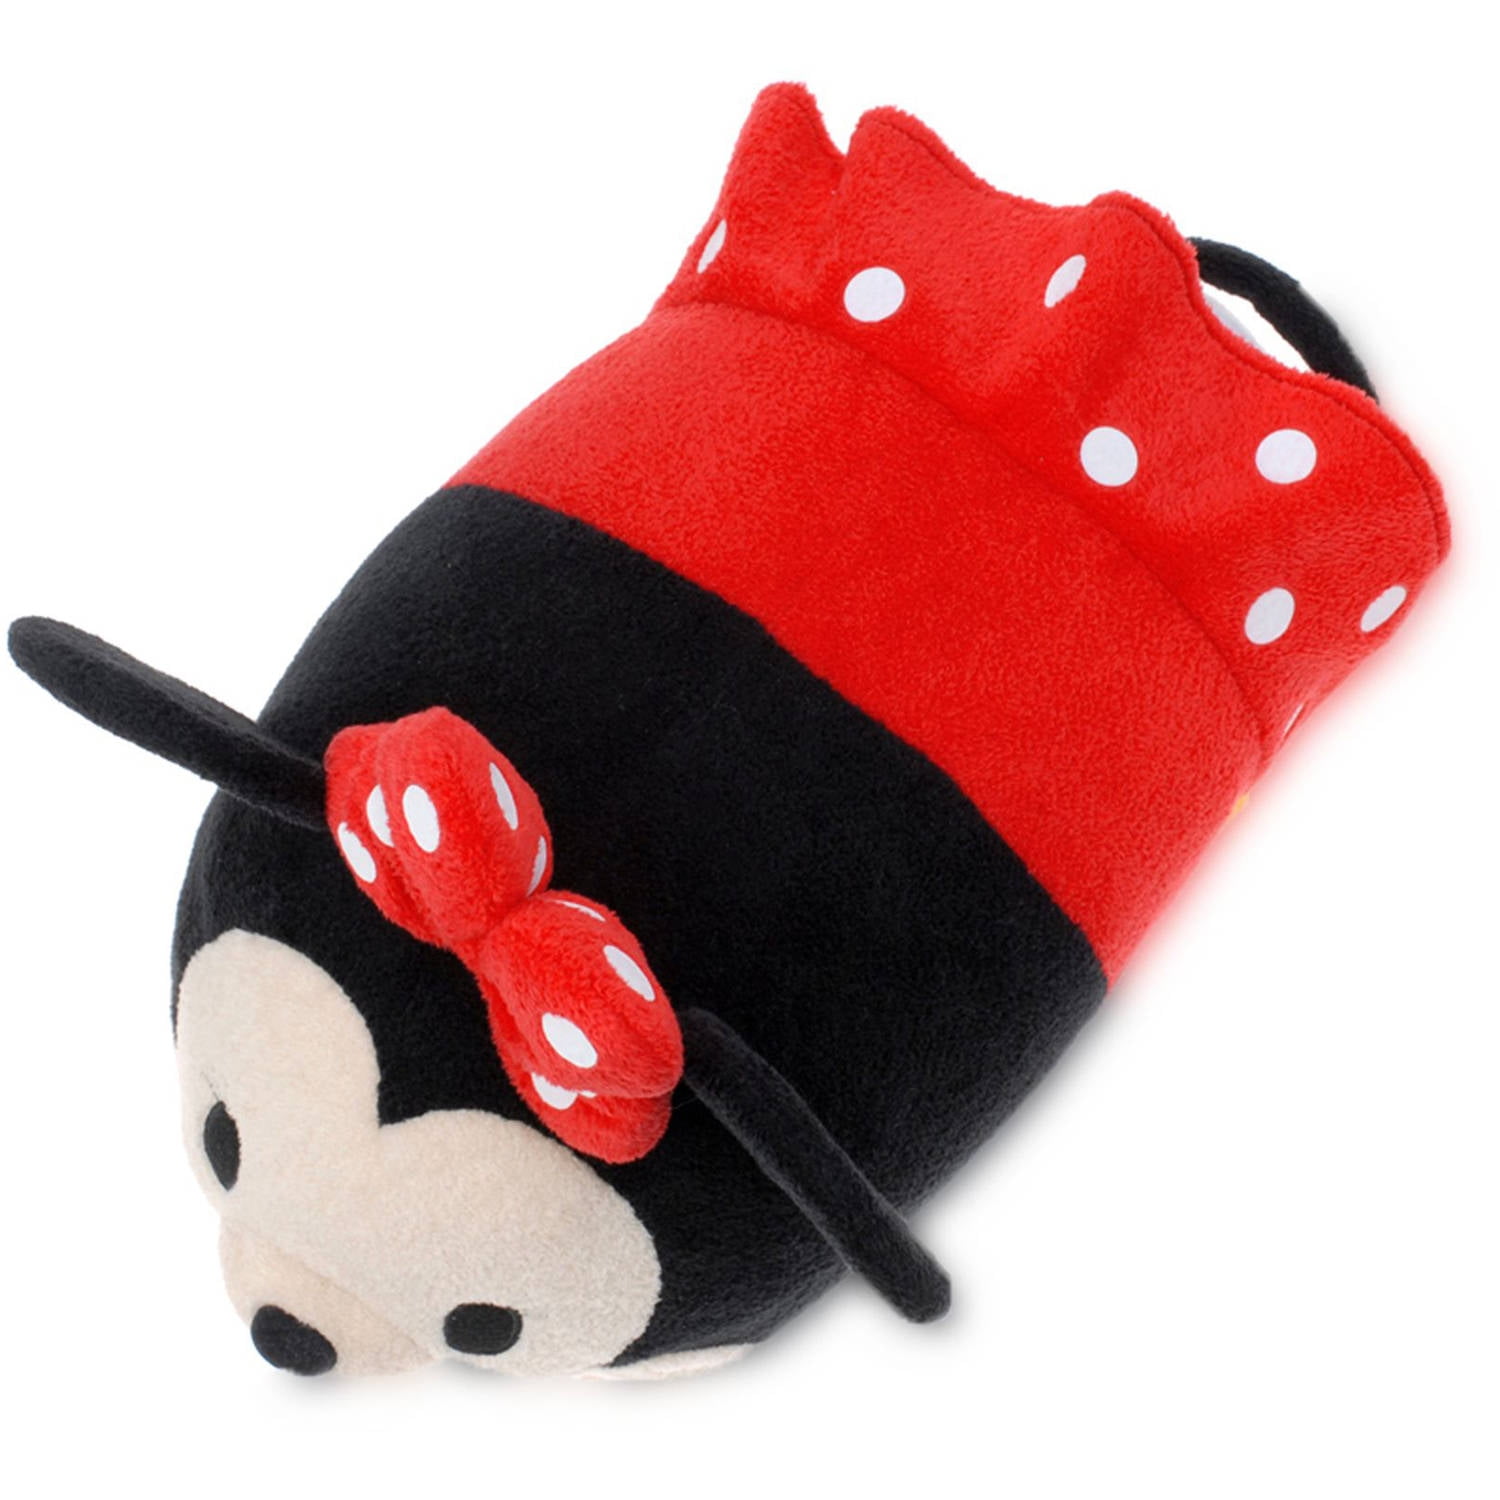 Details about   Authentic Disney Tsum Tsum Plush New York Mickey and Minnie NWT 